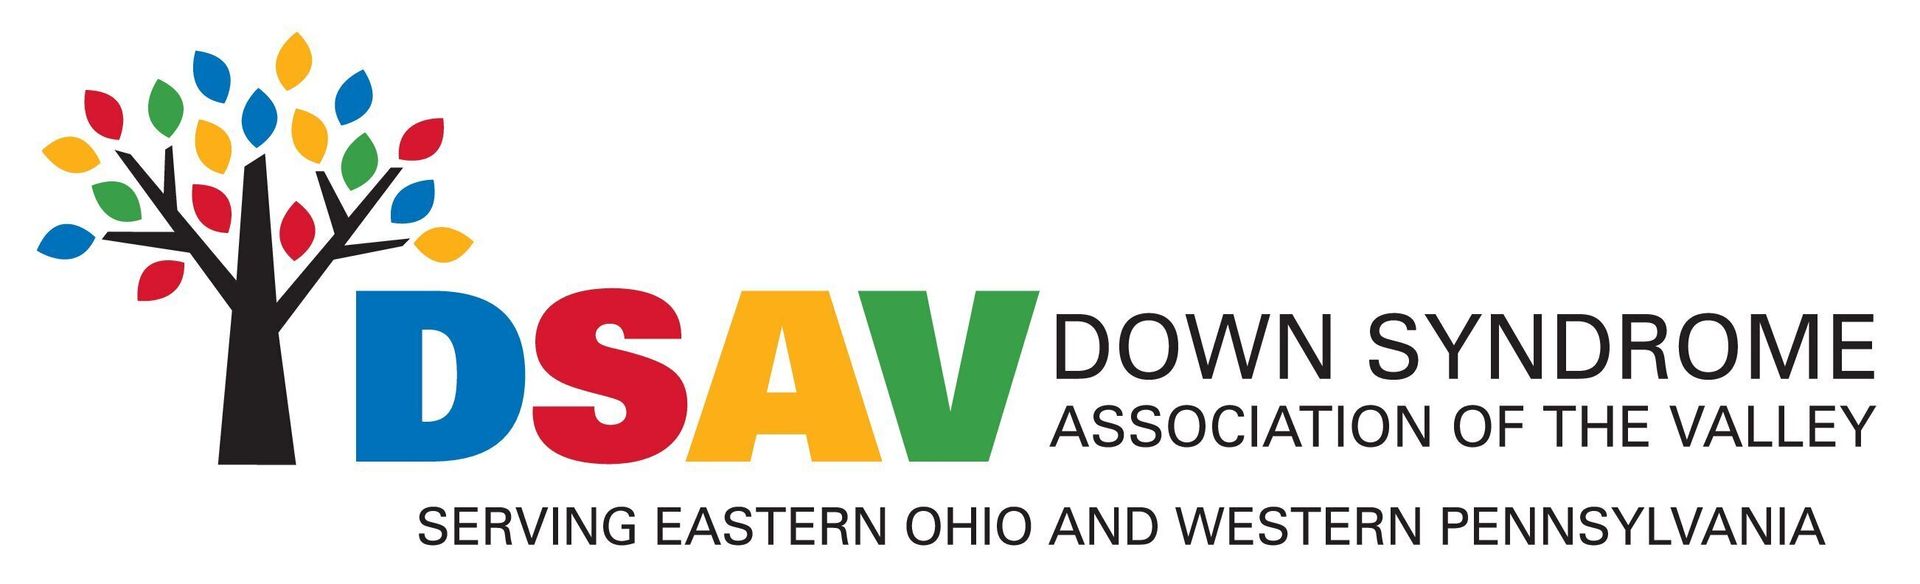 Down Syndrome Association of the Valley